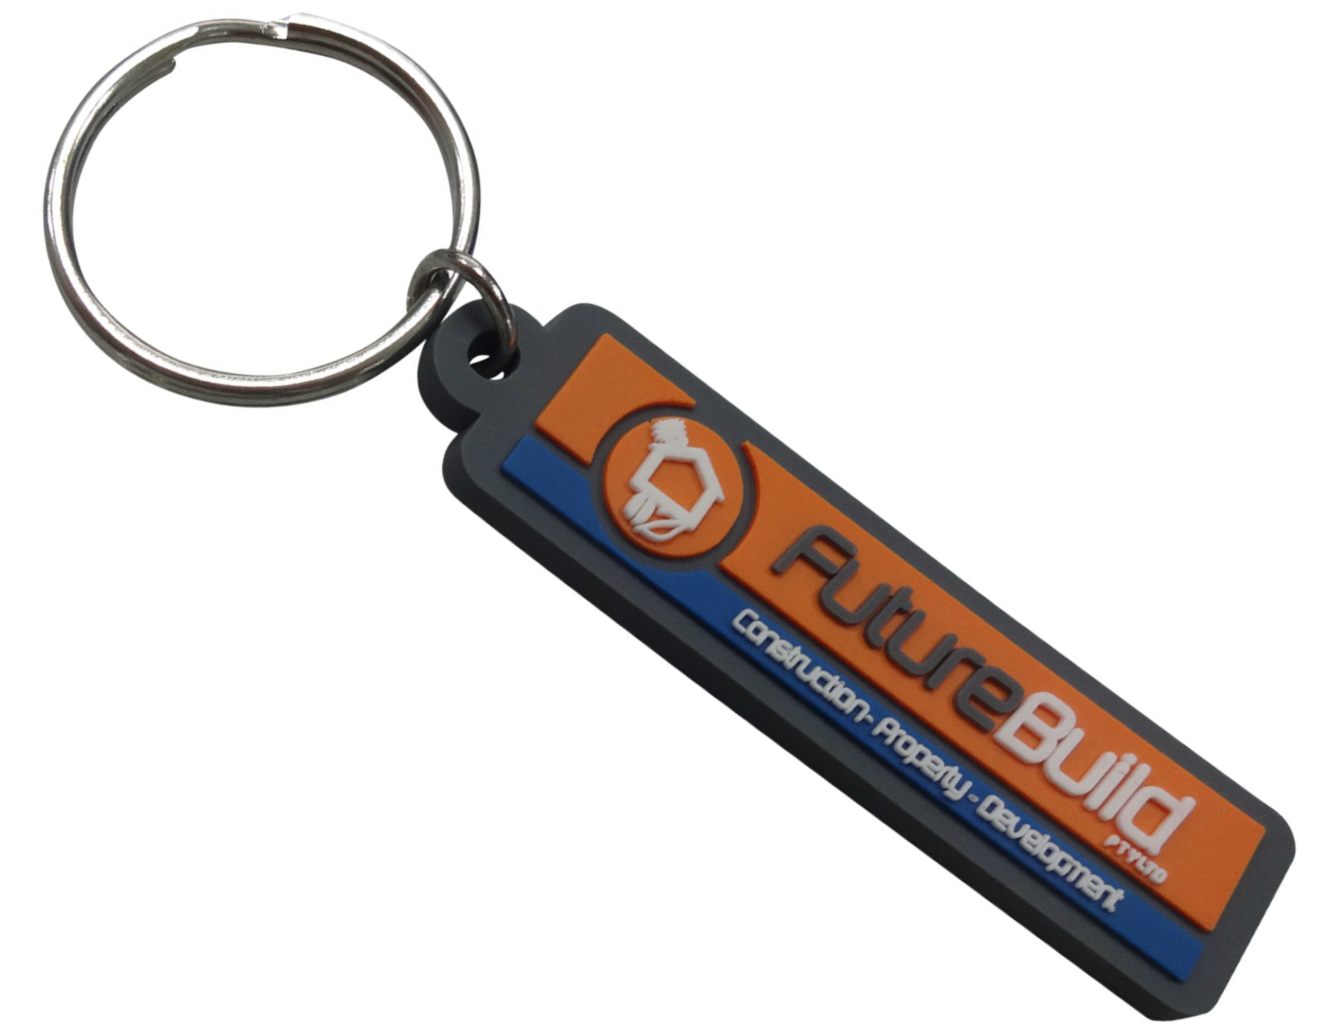 Custom rubber keychain for Future Build construction company with 2D logo.